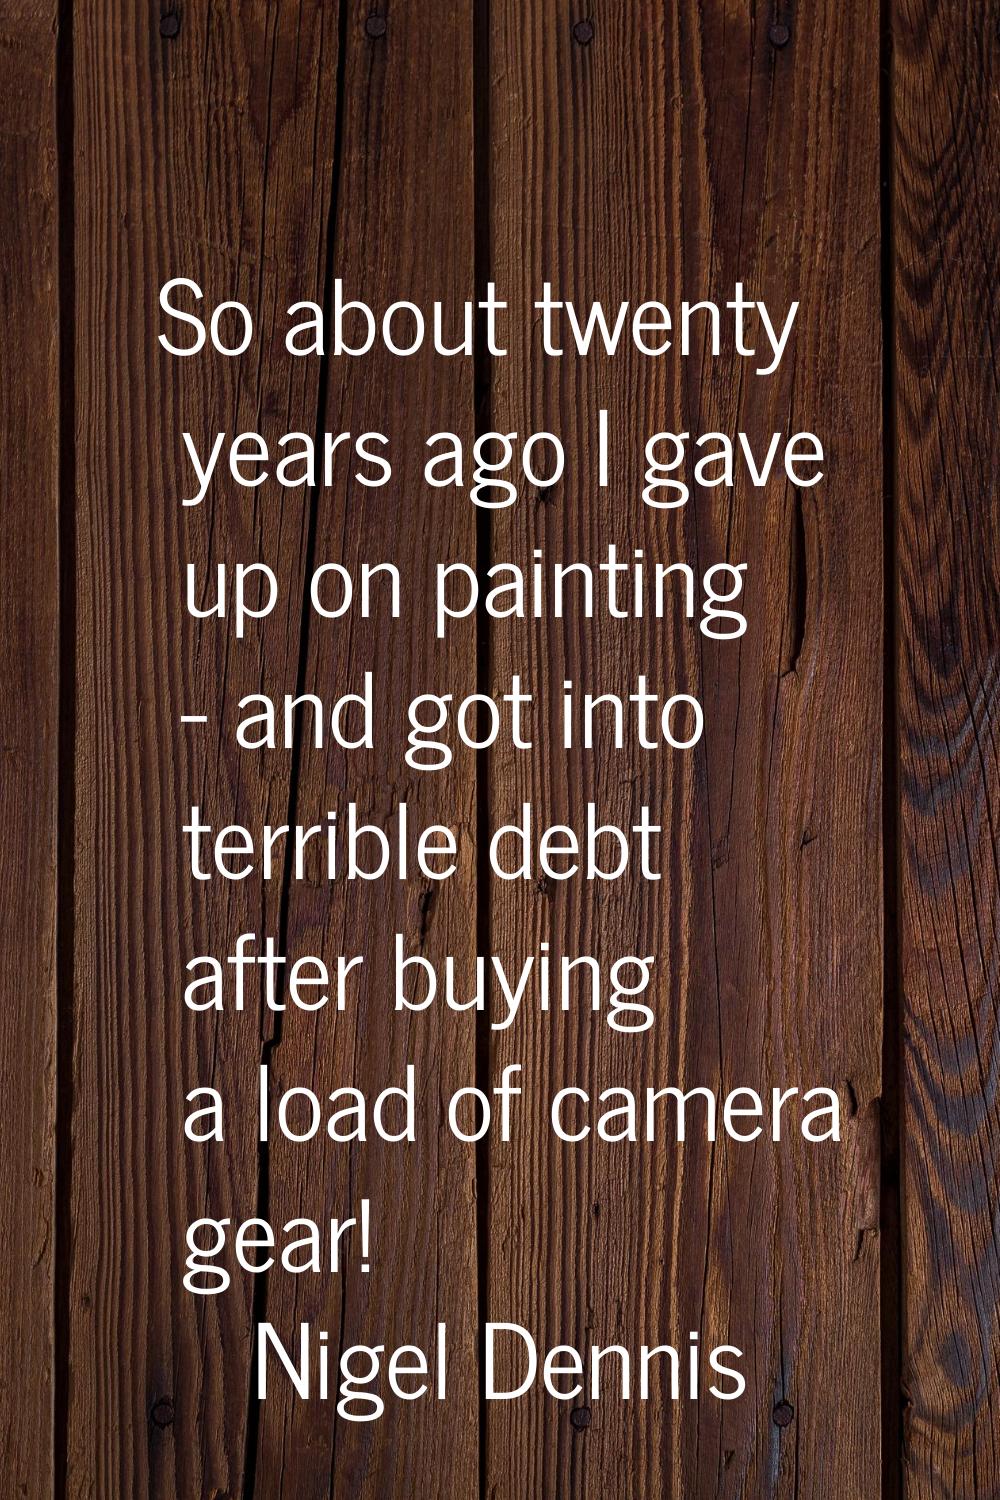 So about twenty years ago I gave up on painting - and got into terrible debt after buying a load of